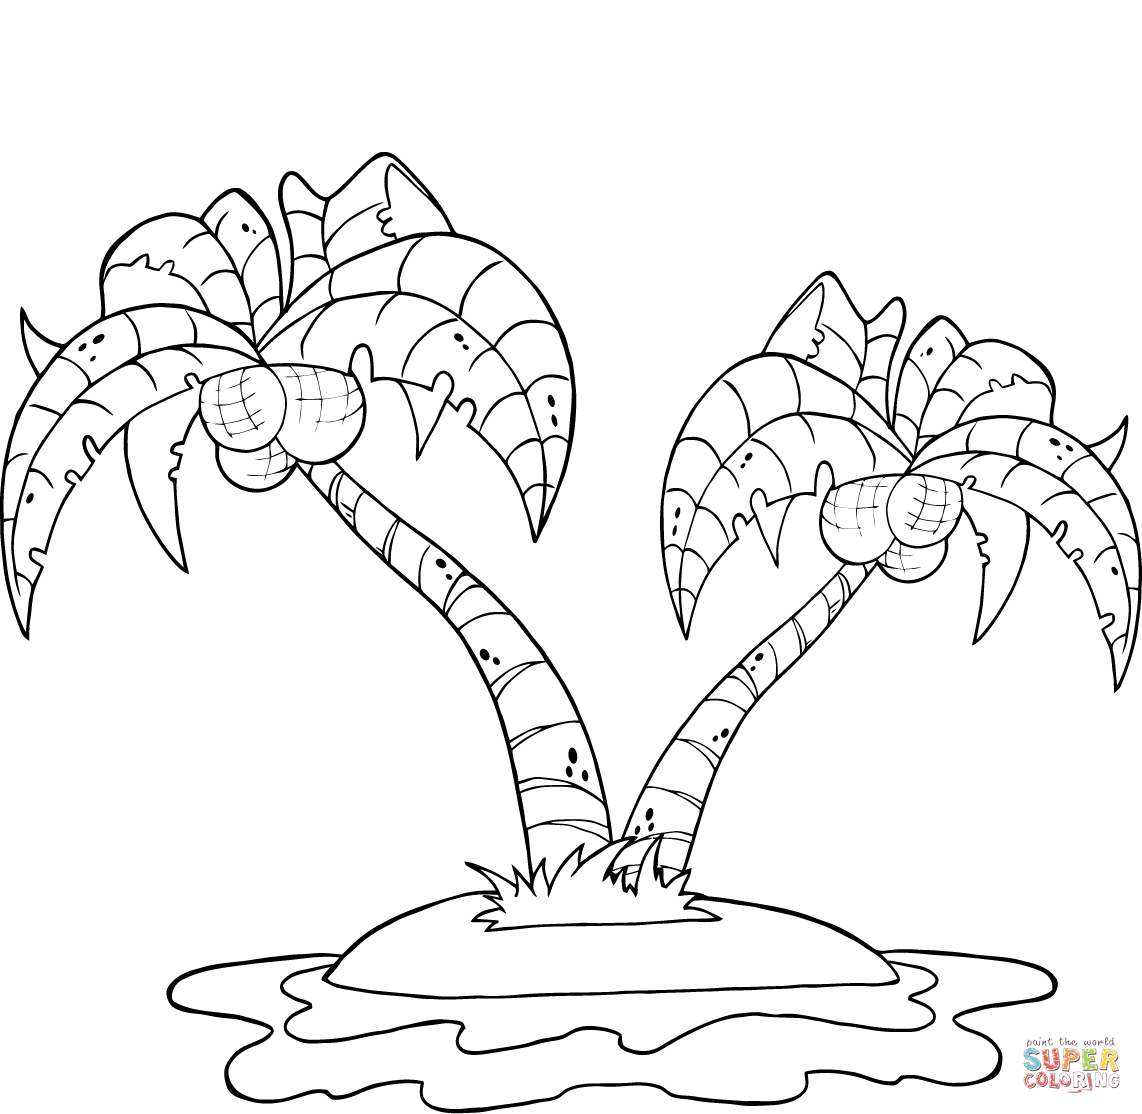 Coconut Palm Trees on Island coloring page | Free Printable ...